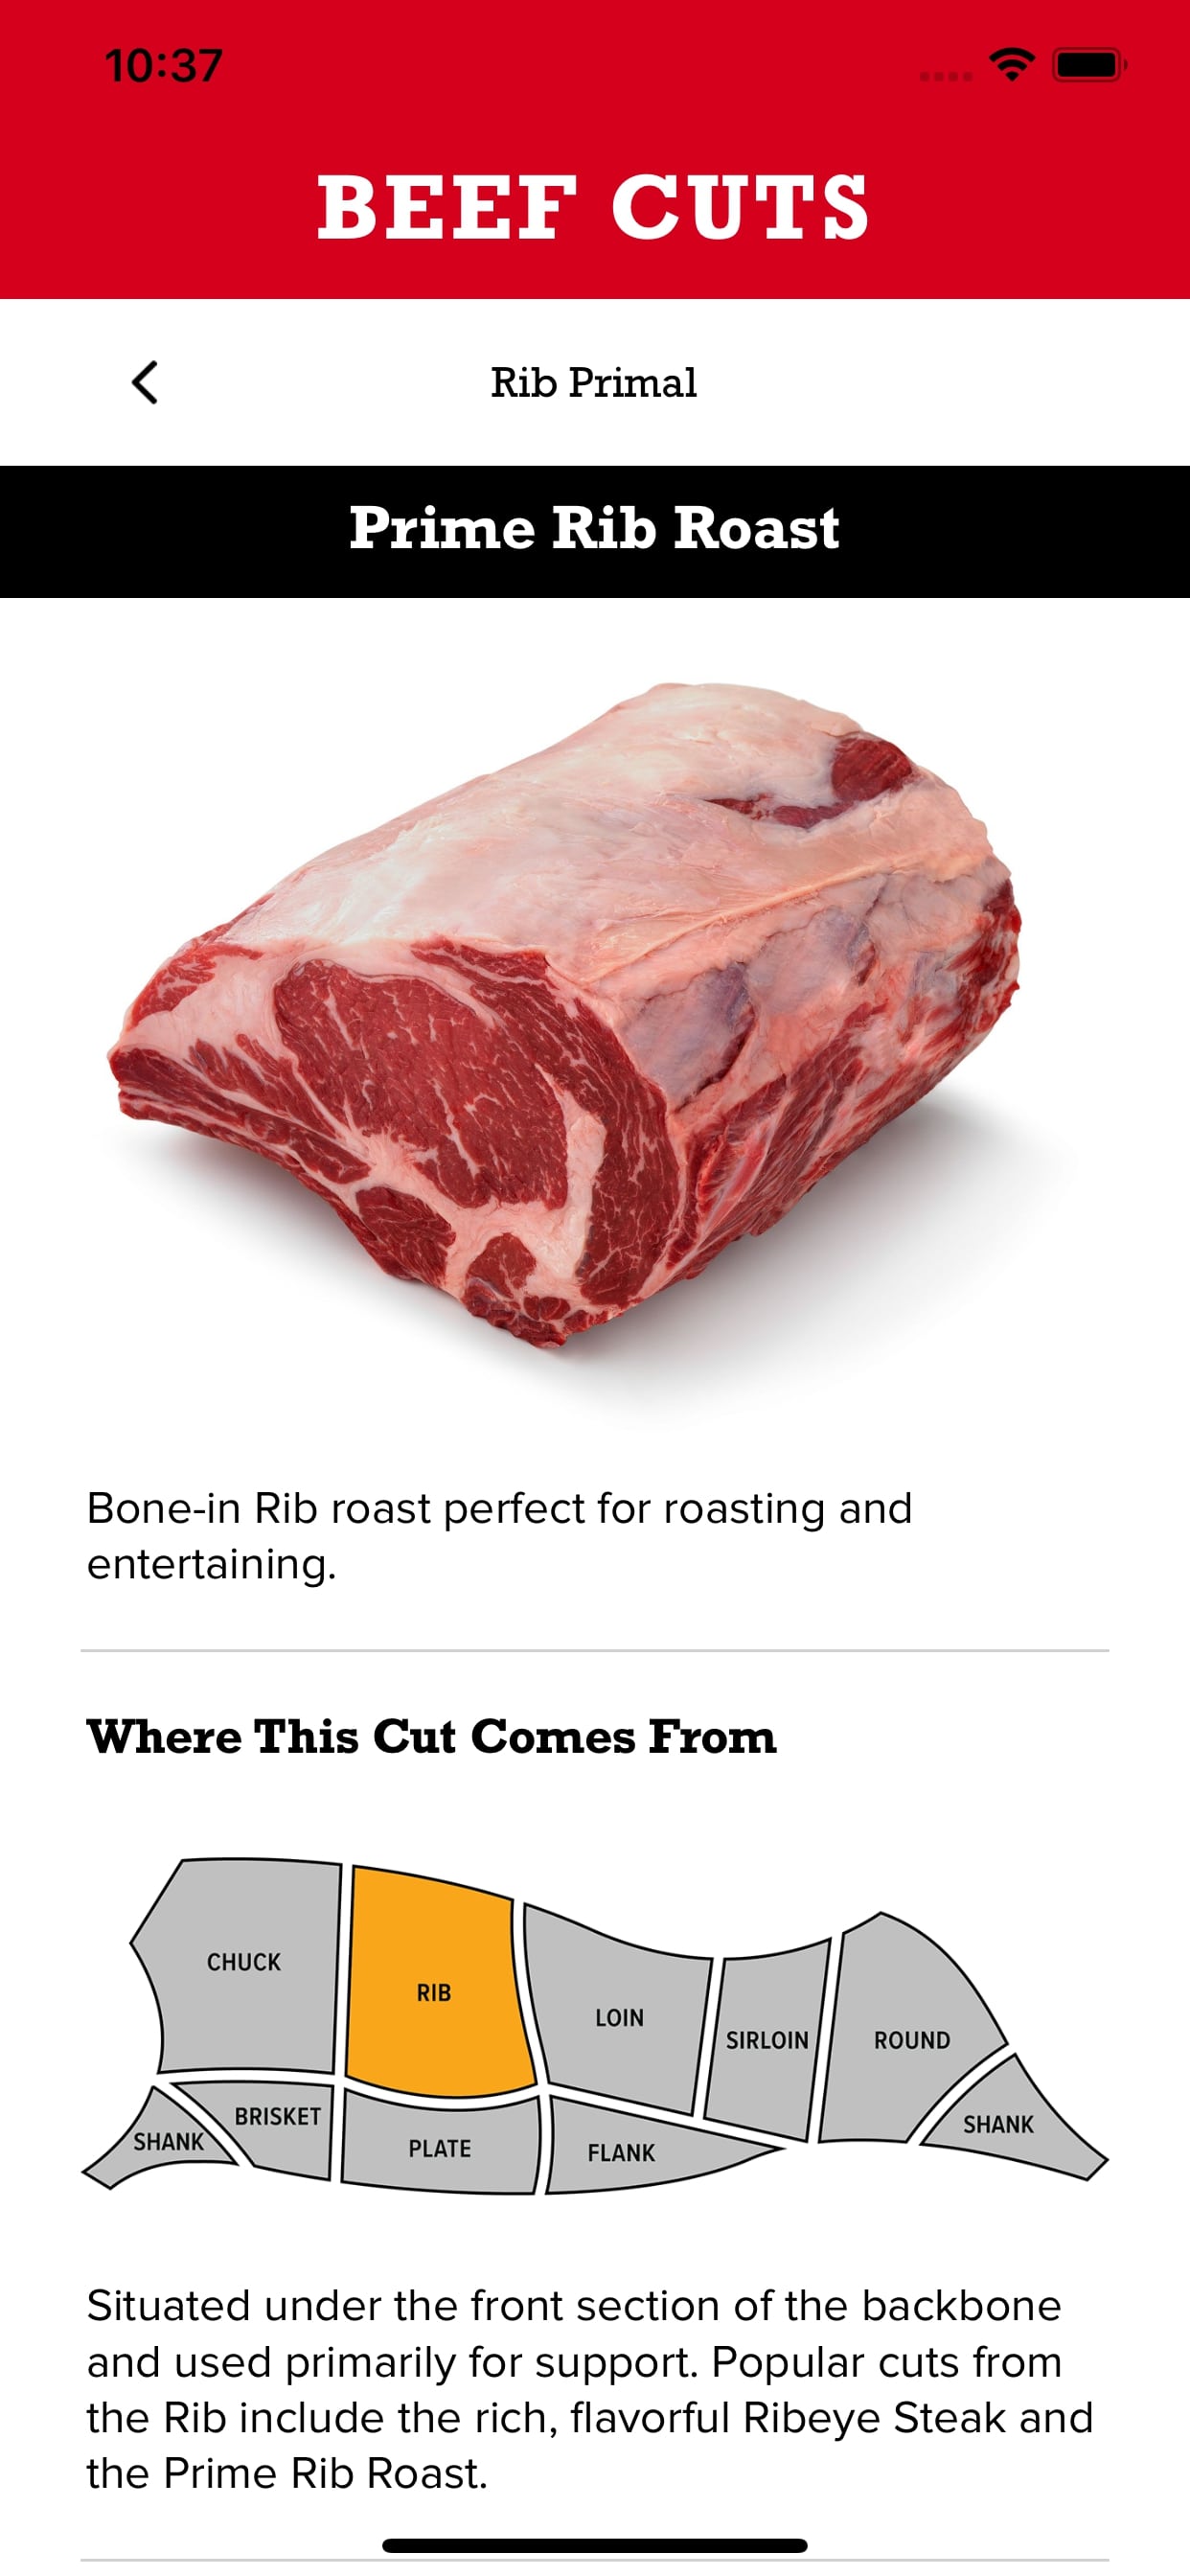 Beef cuts can be accessed right from the home screen, with cuts sorted by both Primals and Cut Type.